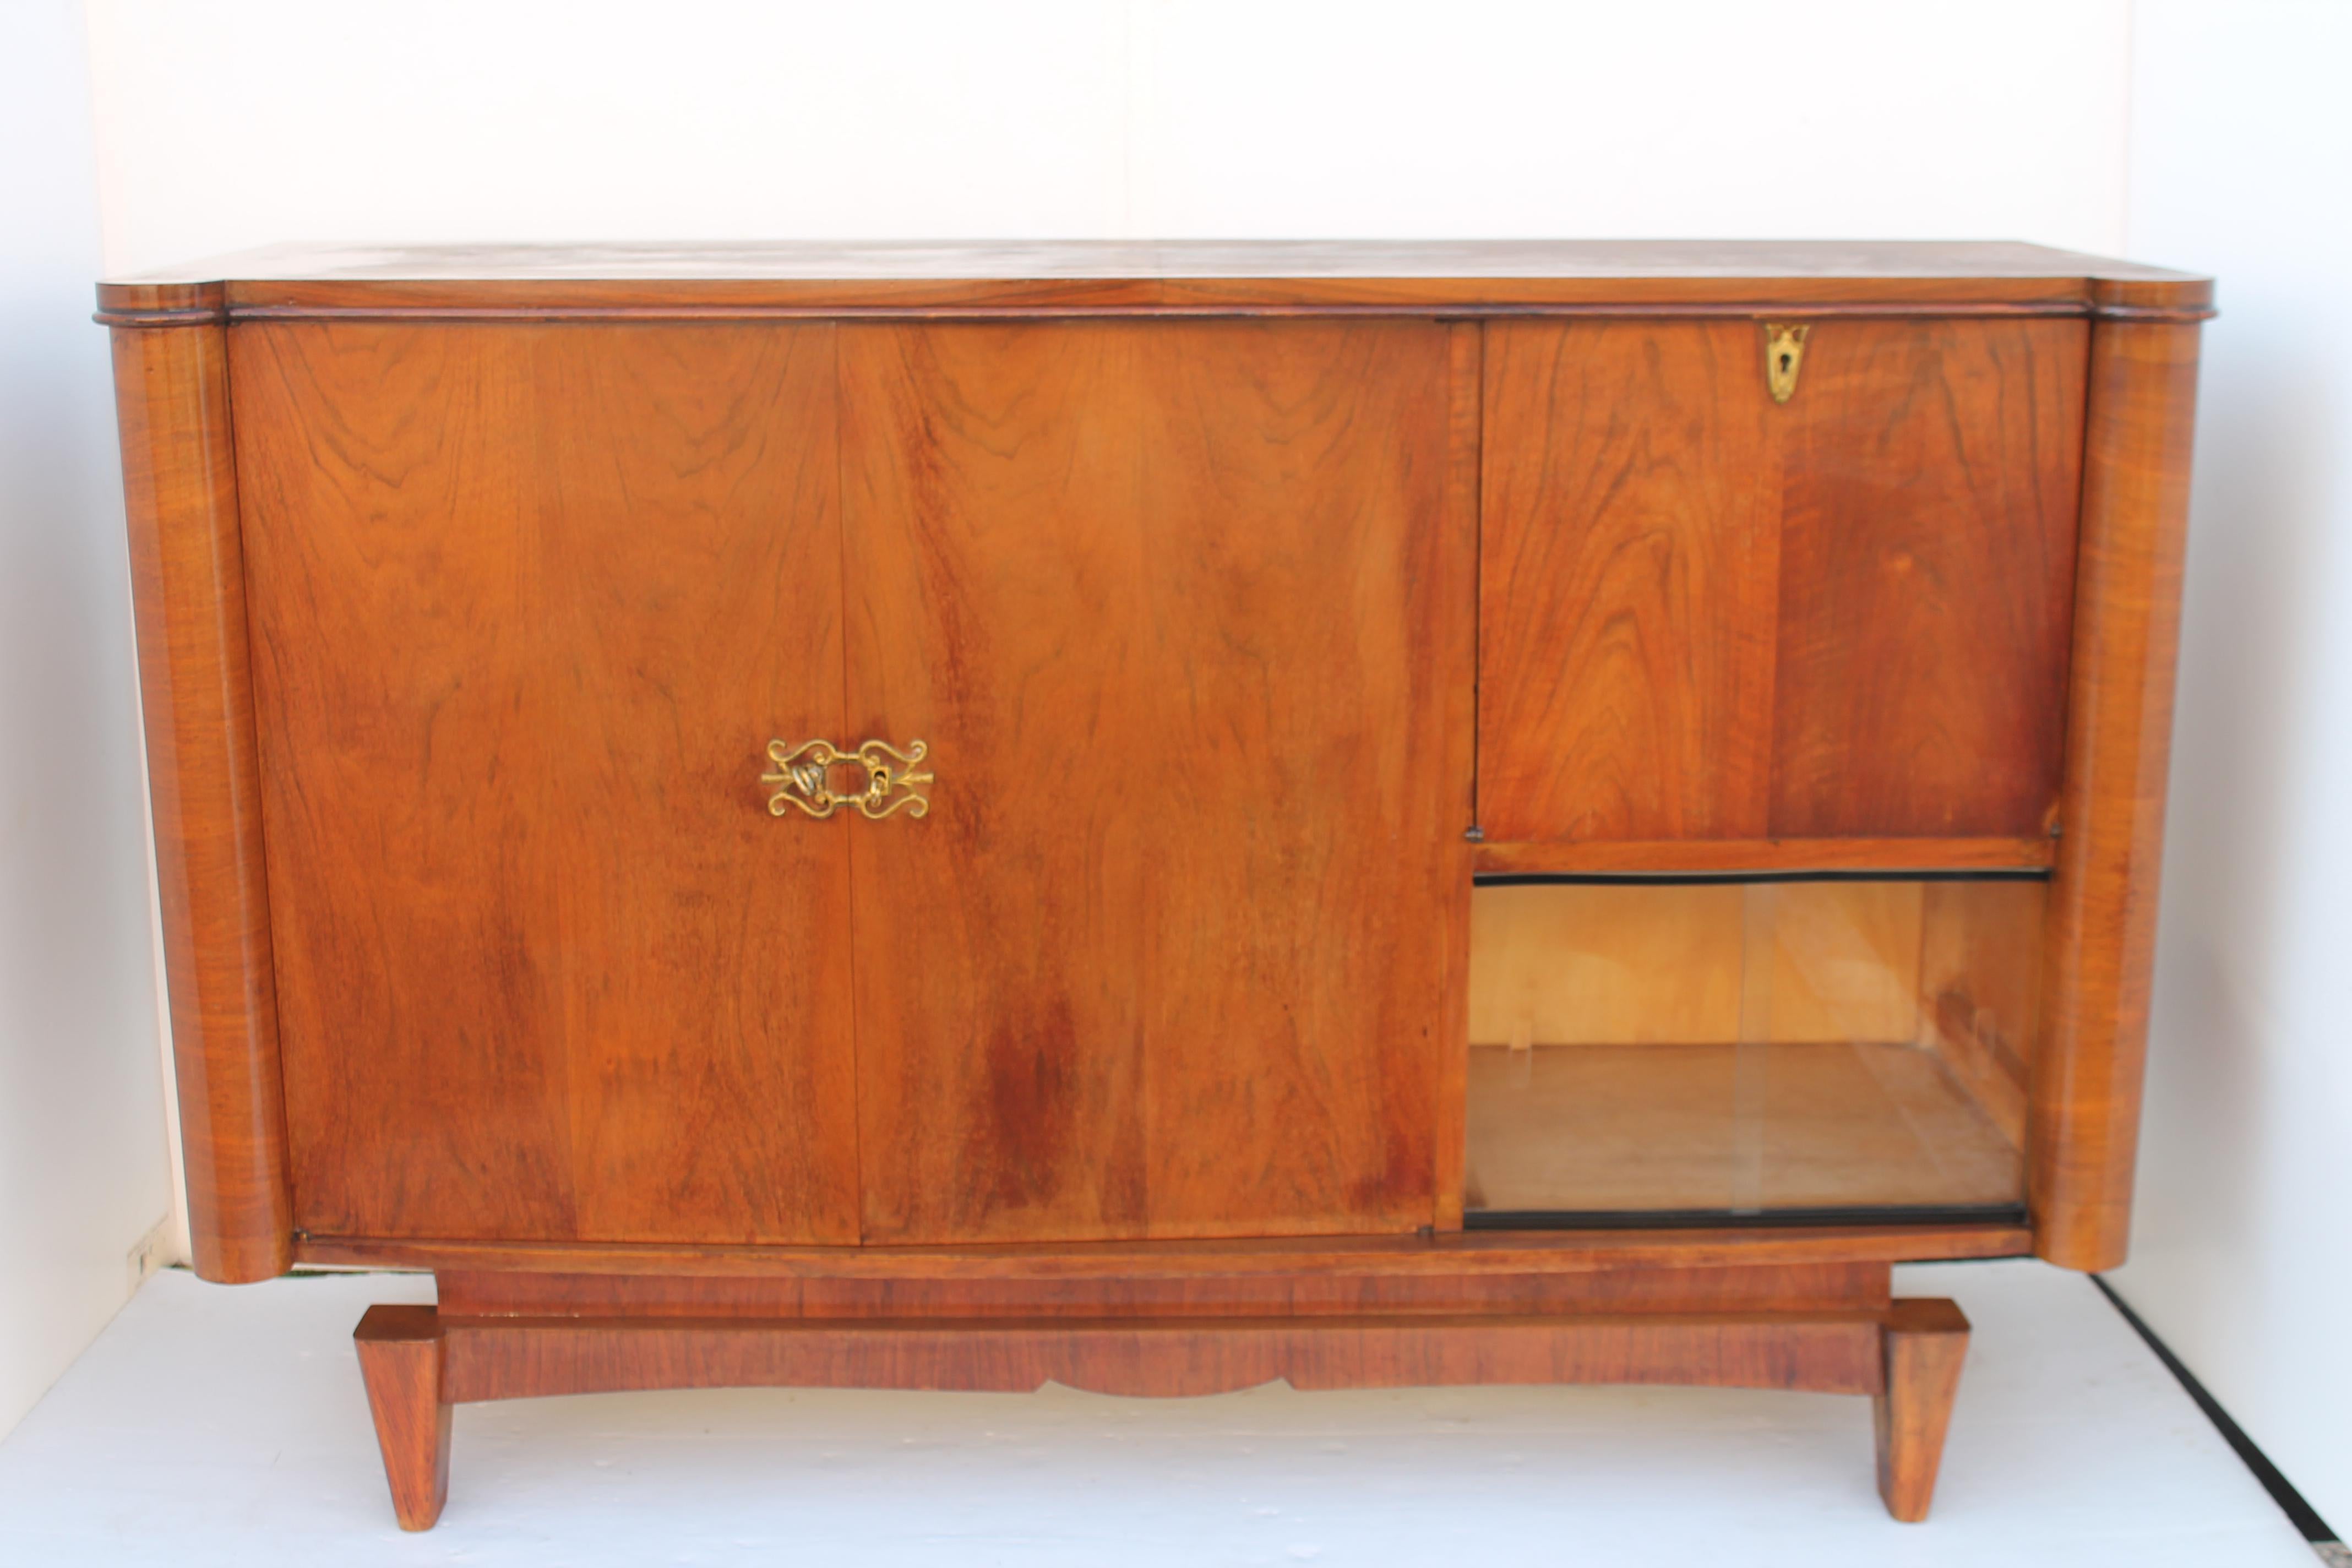 1960's French Modern - Blonde Toned Buffet/ Sideboard/ Credenza/ Dry Bar In Good Condition For Sale In Opa Locka, FL